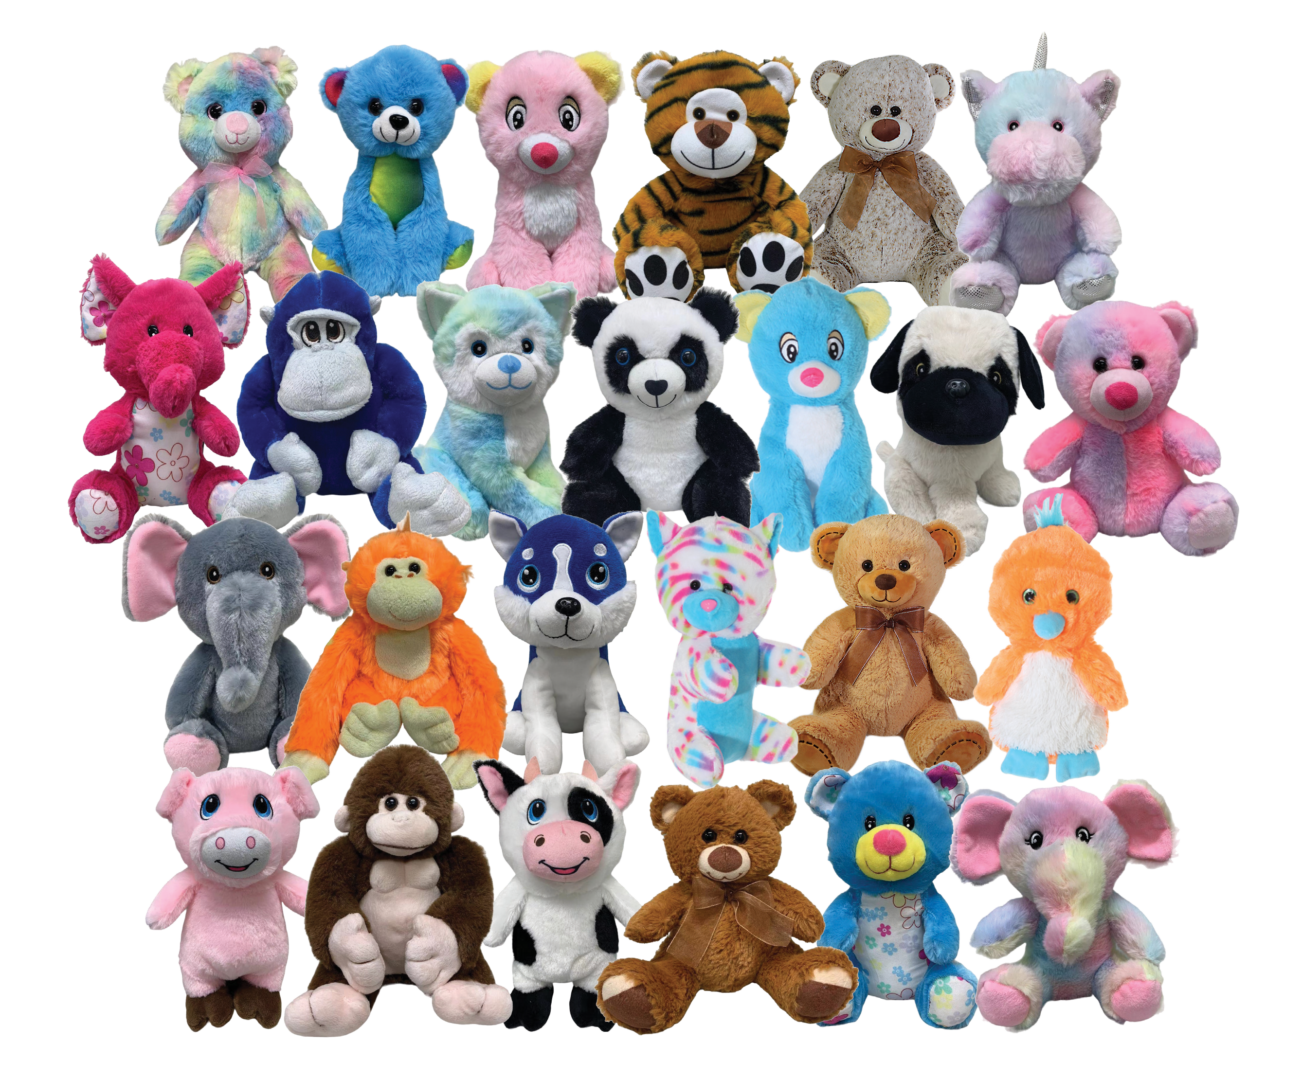 A bunch of stuffed animals are all together